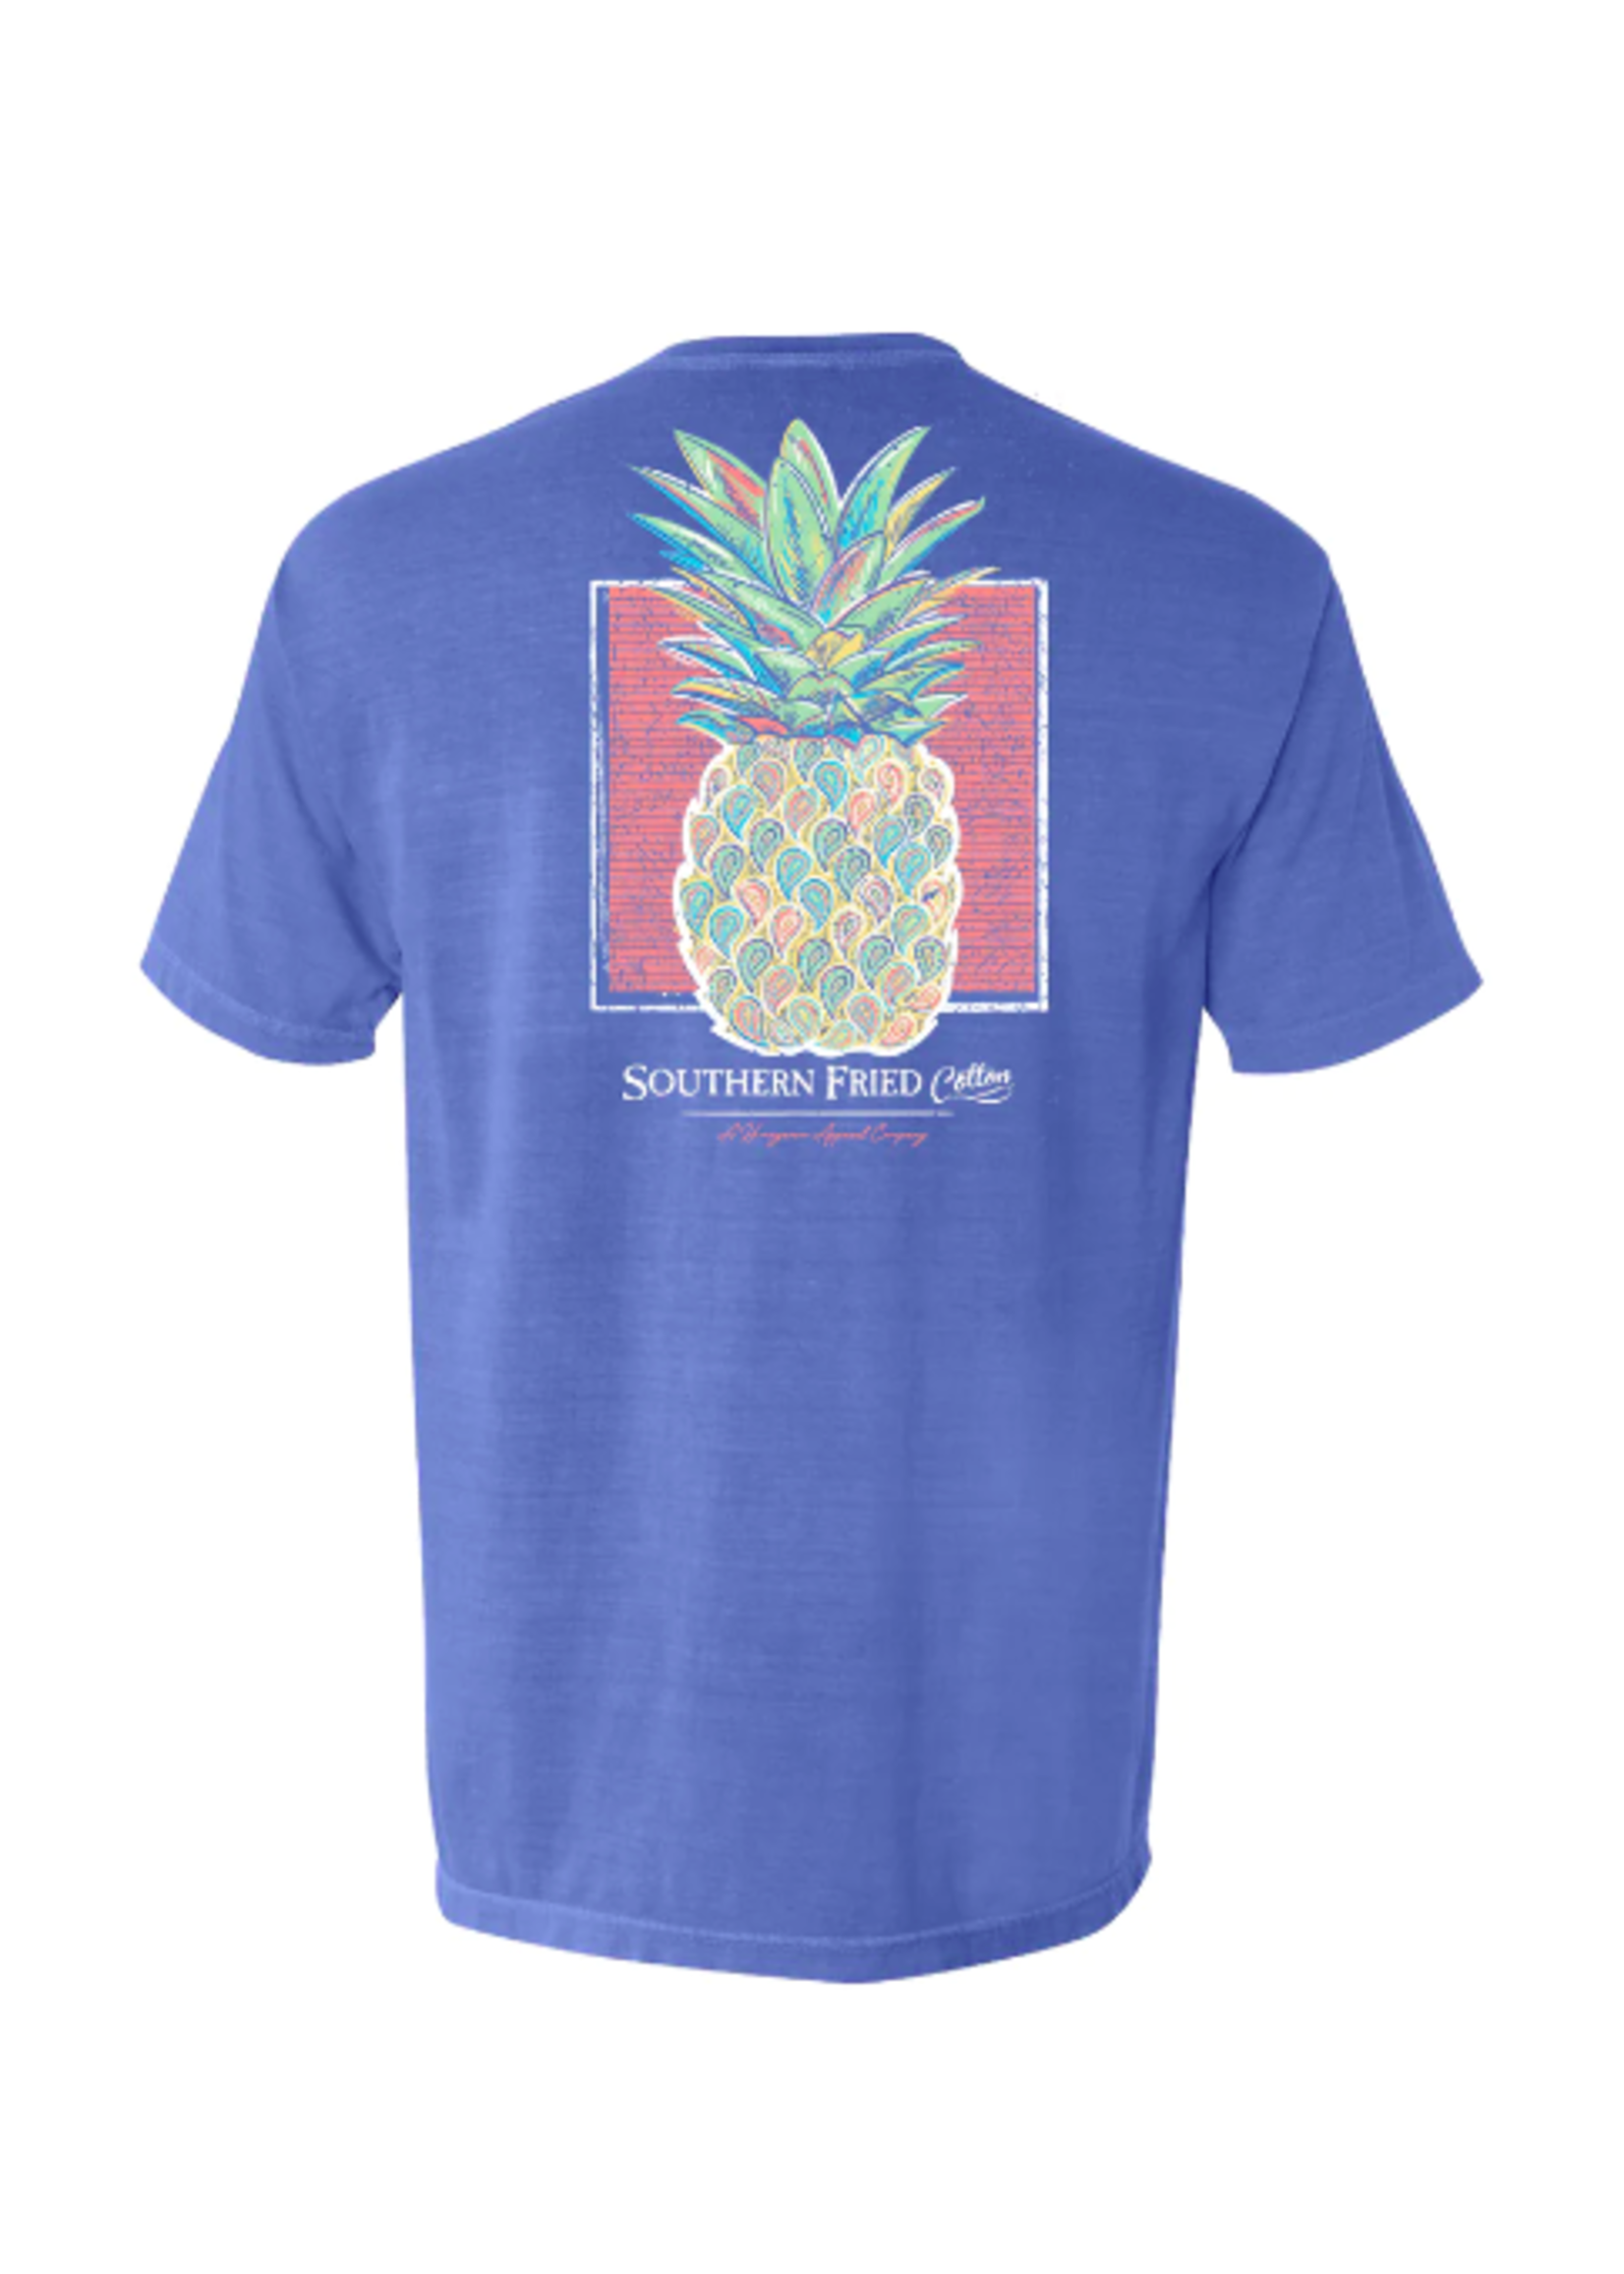 Southern Fried Cotton Paisley Pineapple